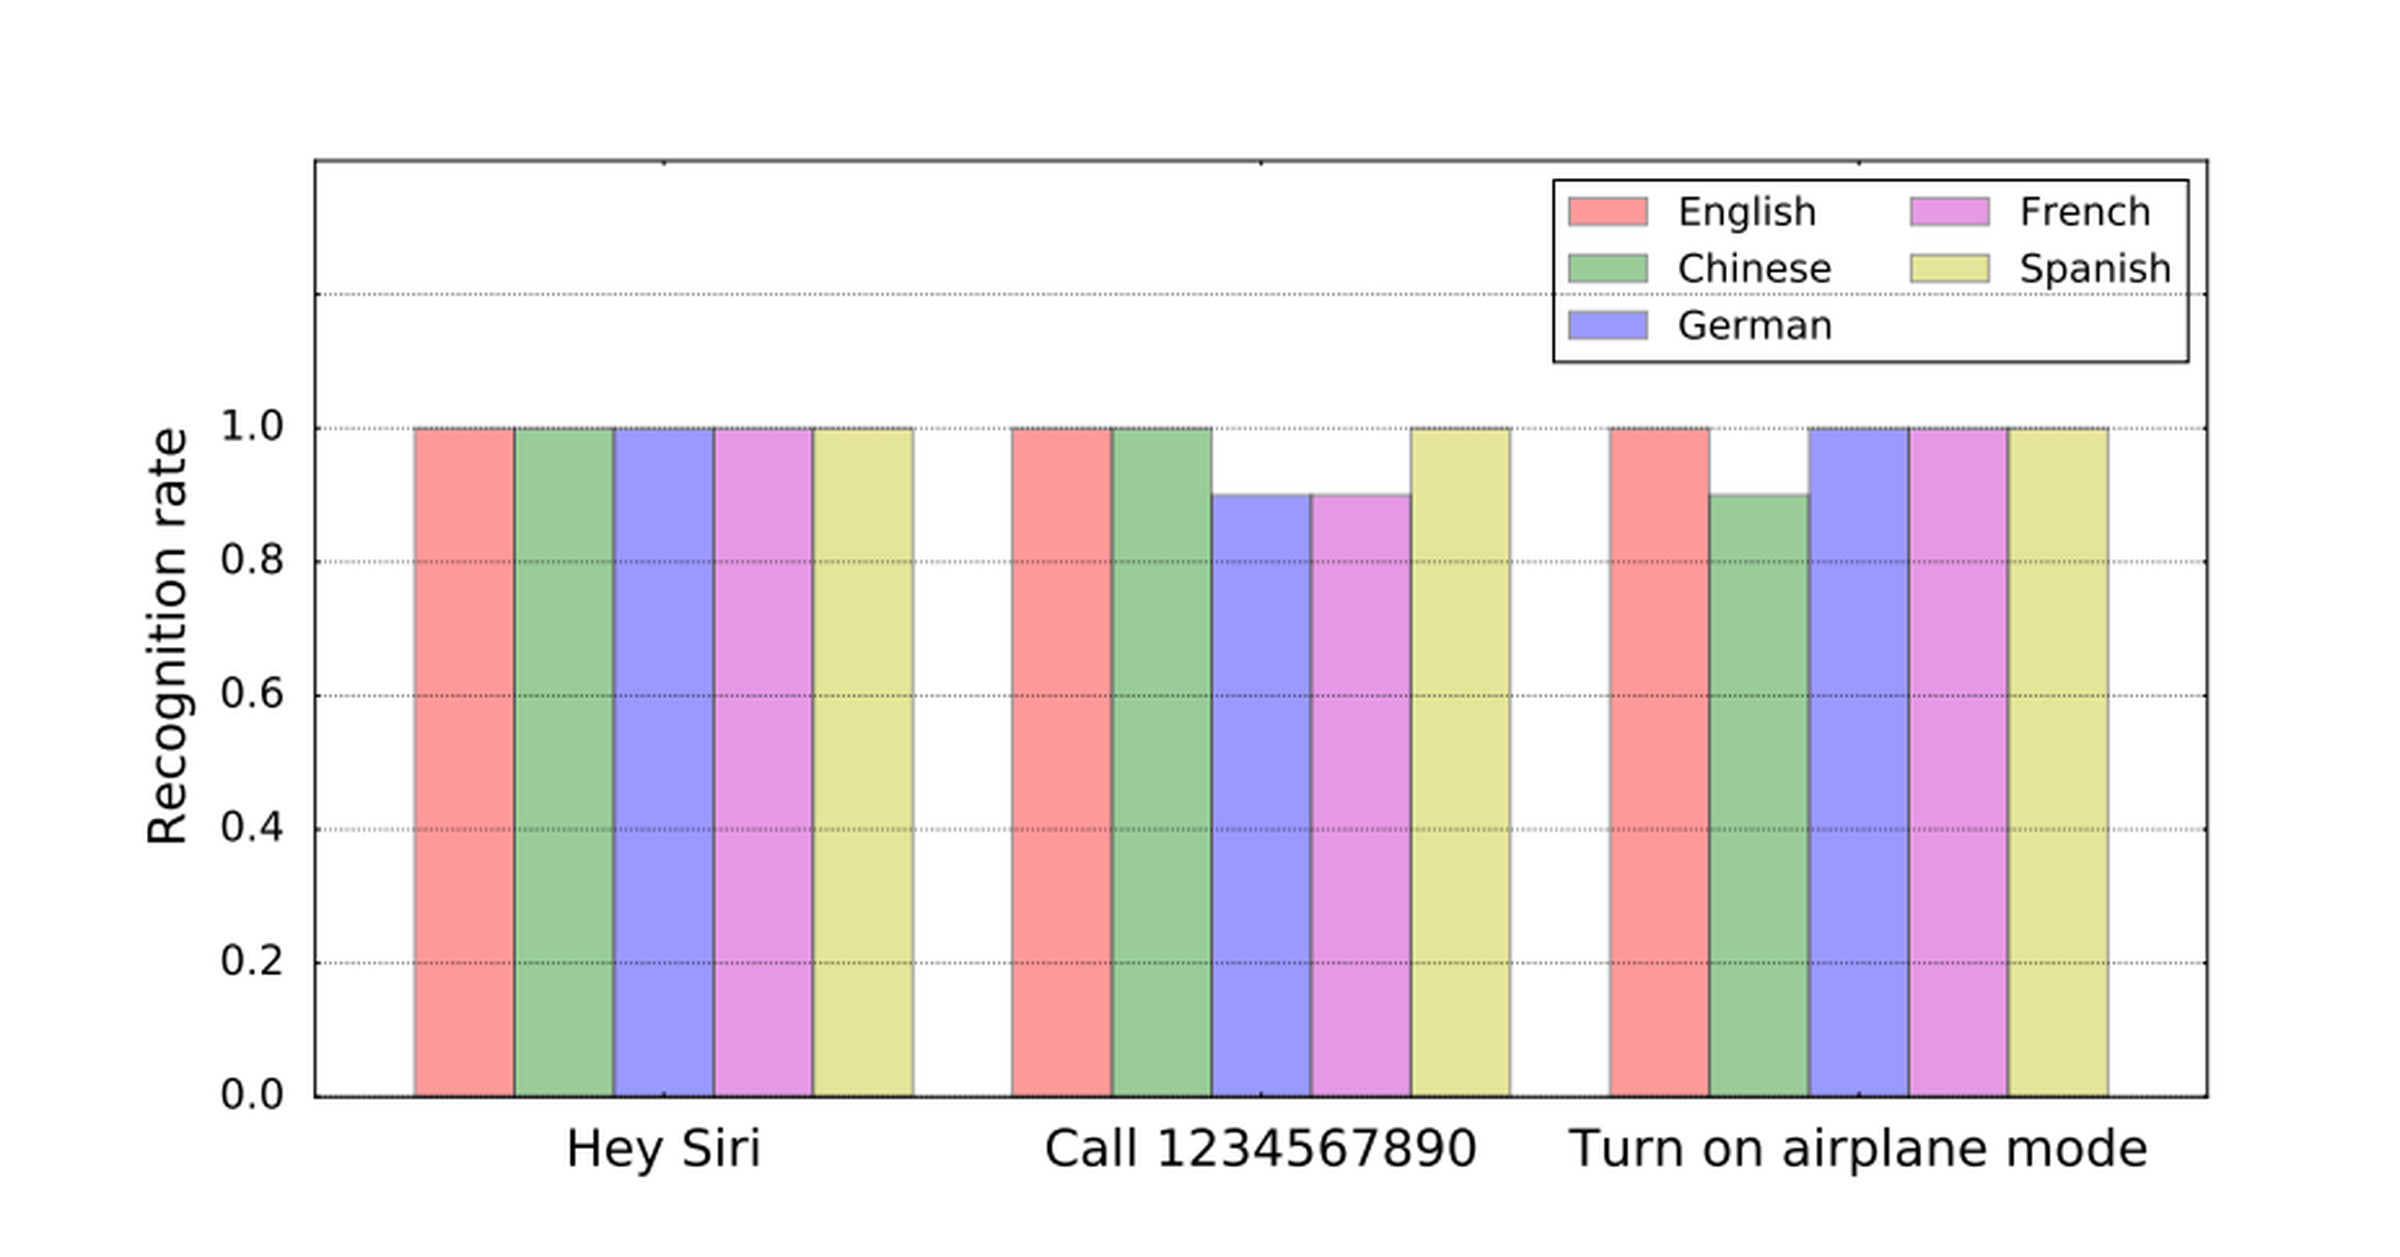  DolphinAttack proved to be consistently able to issue commands to a number of devices in different languages. Here are some of the test results for controlling Siri. 